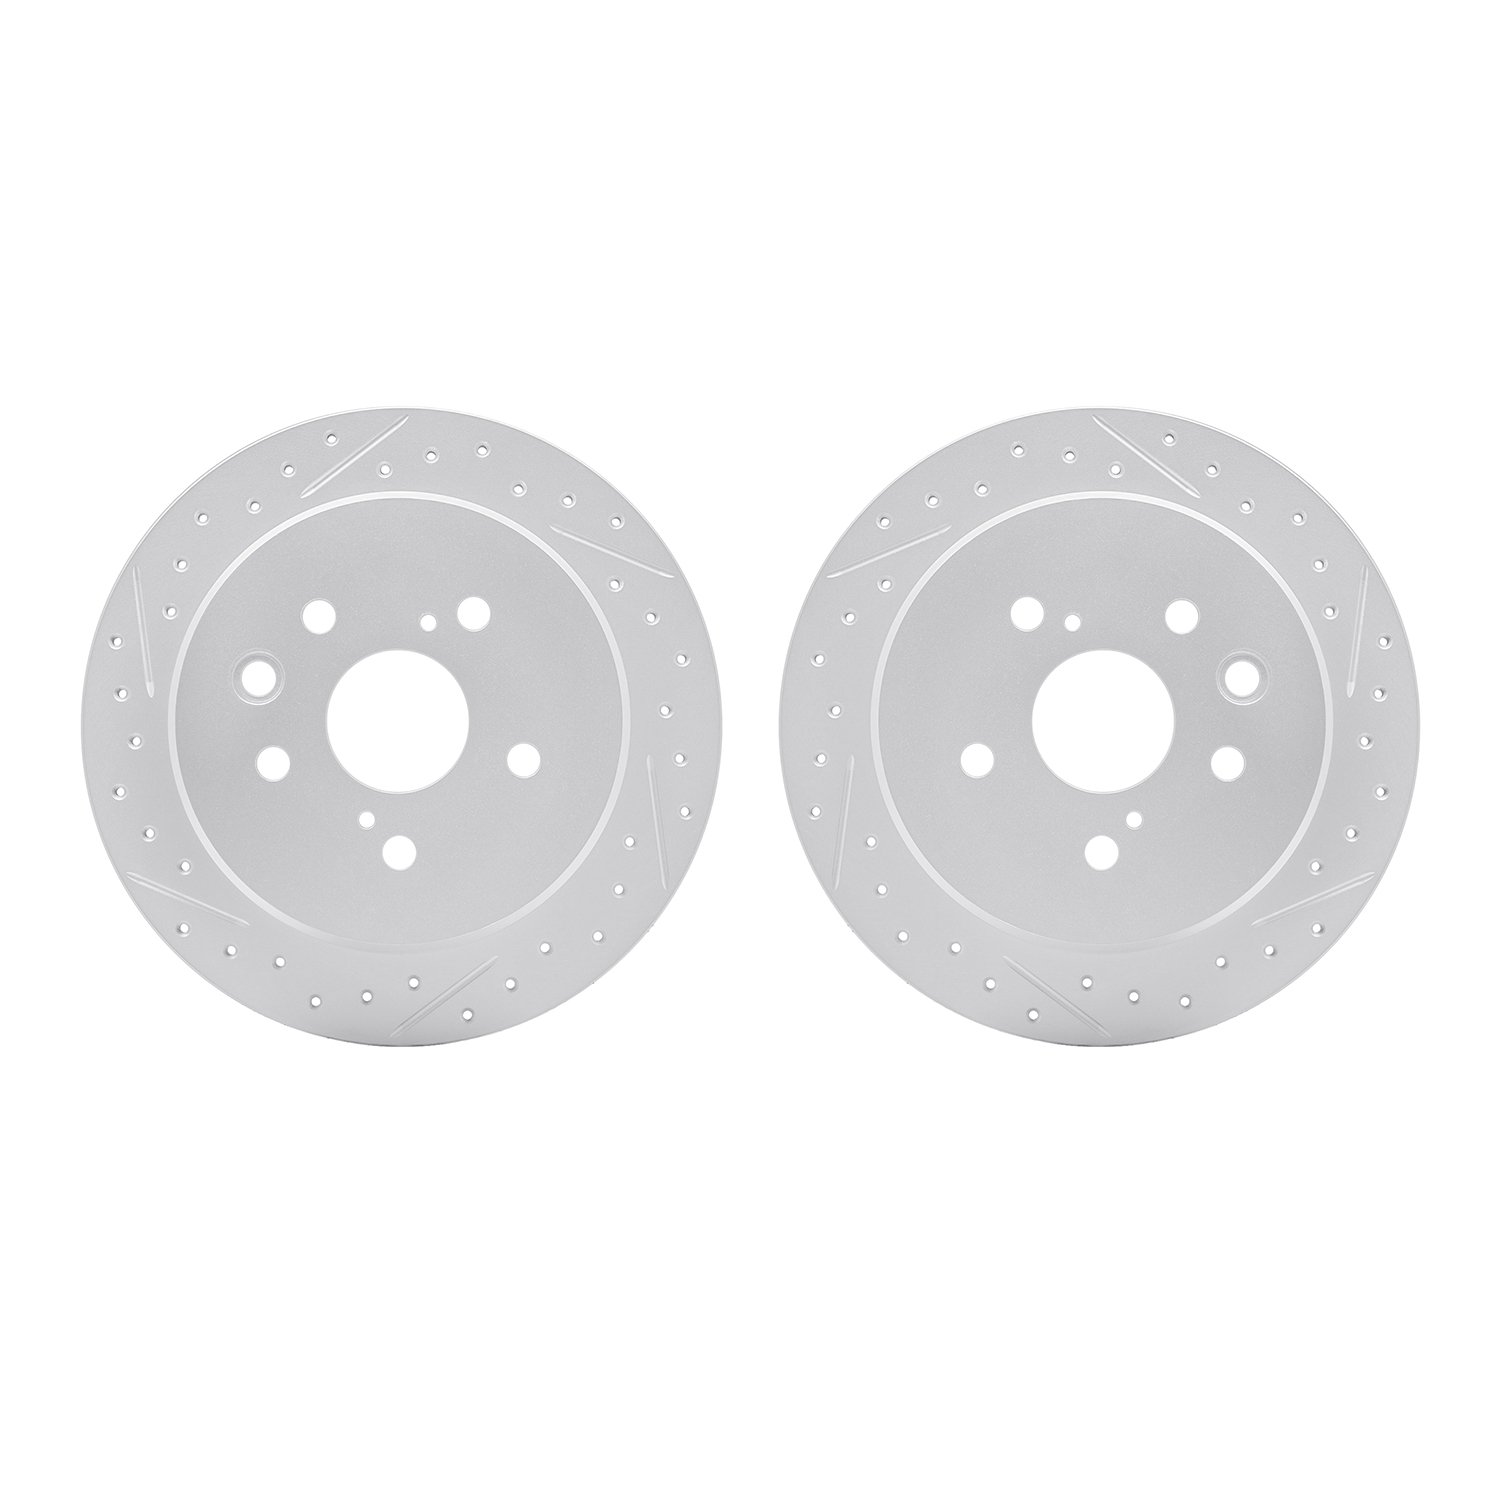 2002-75021 Geoperformance Drilled/Slotted Brake Rotors, 2006-2015 Lexus/Toyota/Scion, Position: Rear